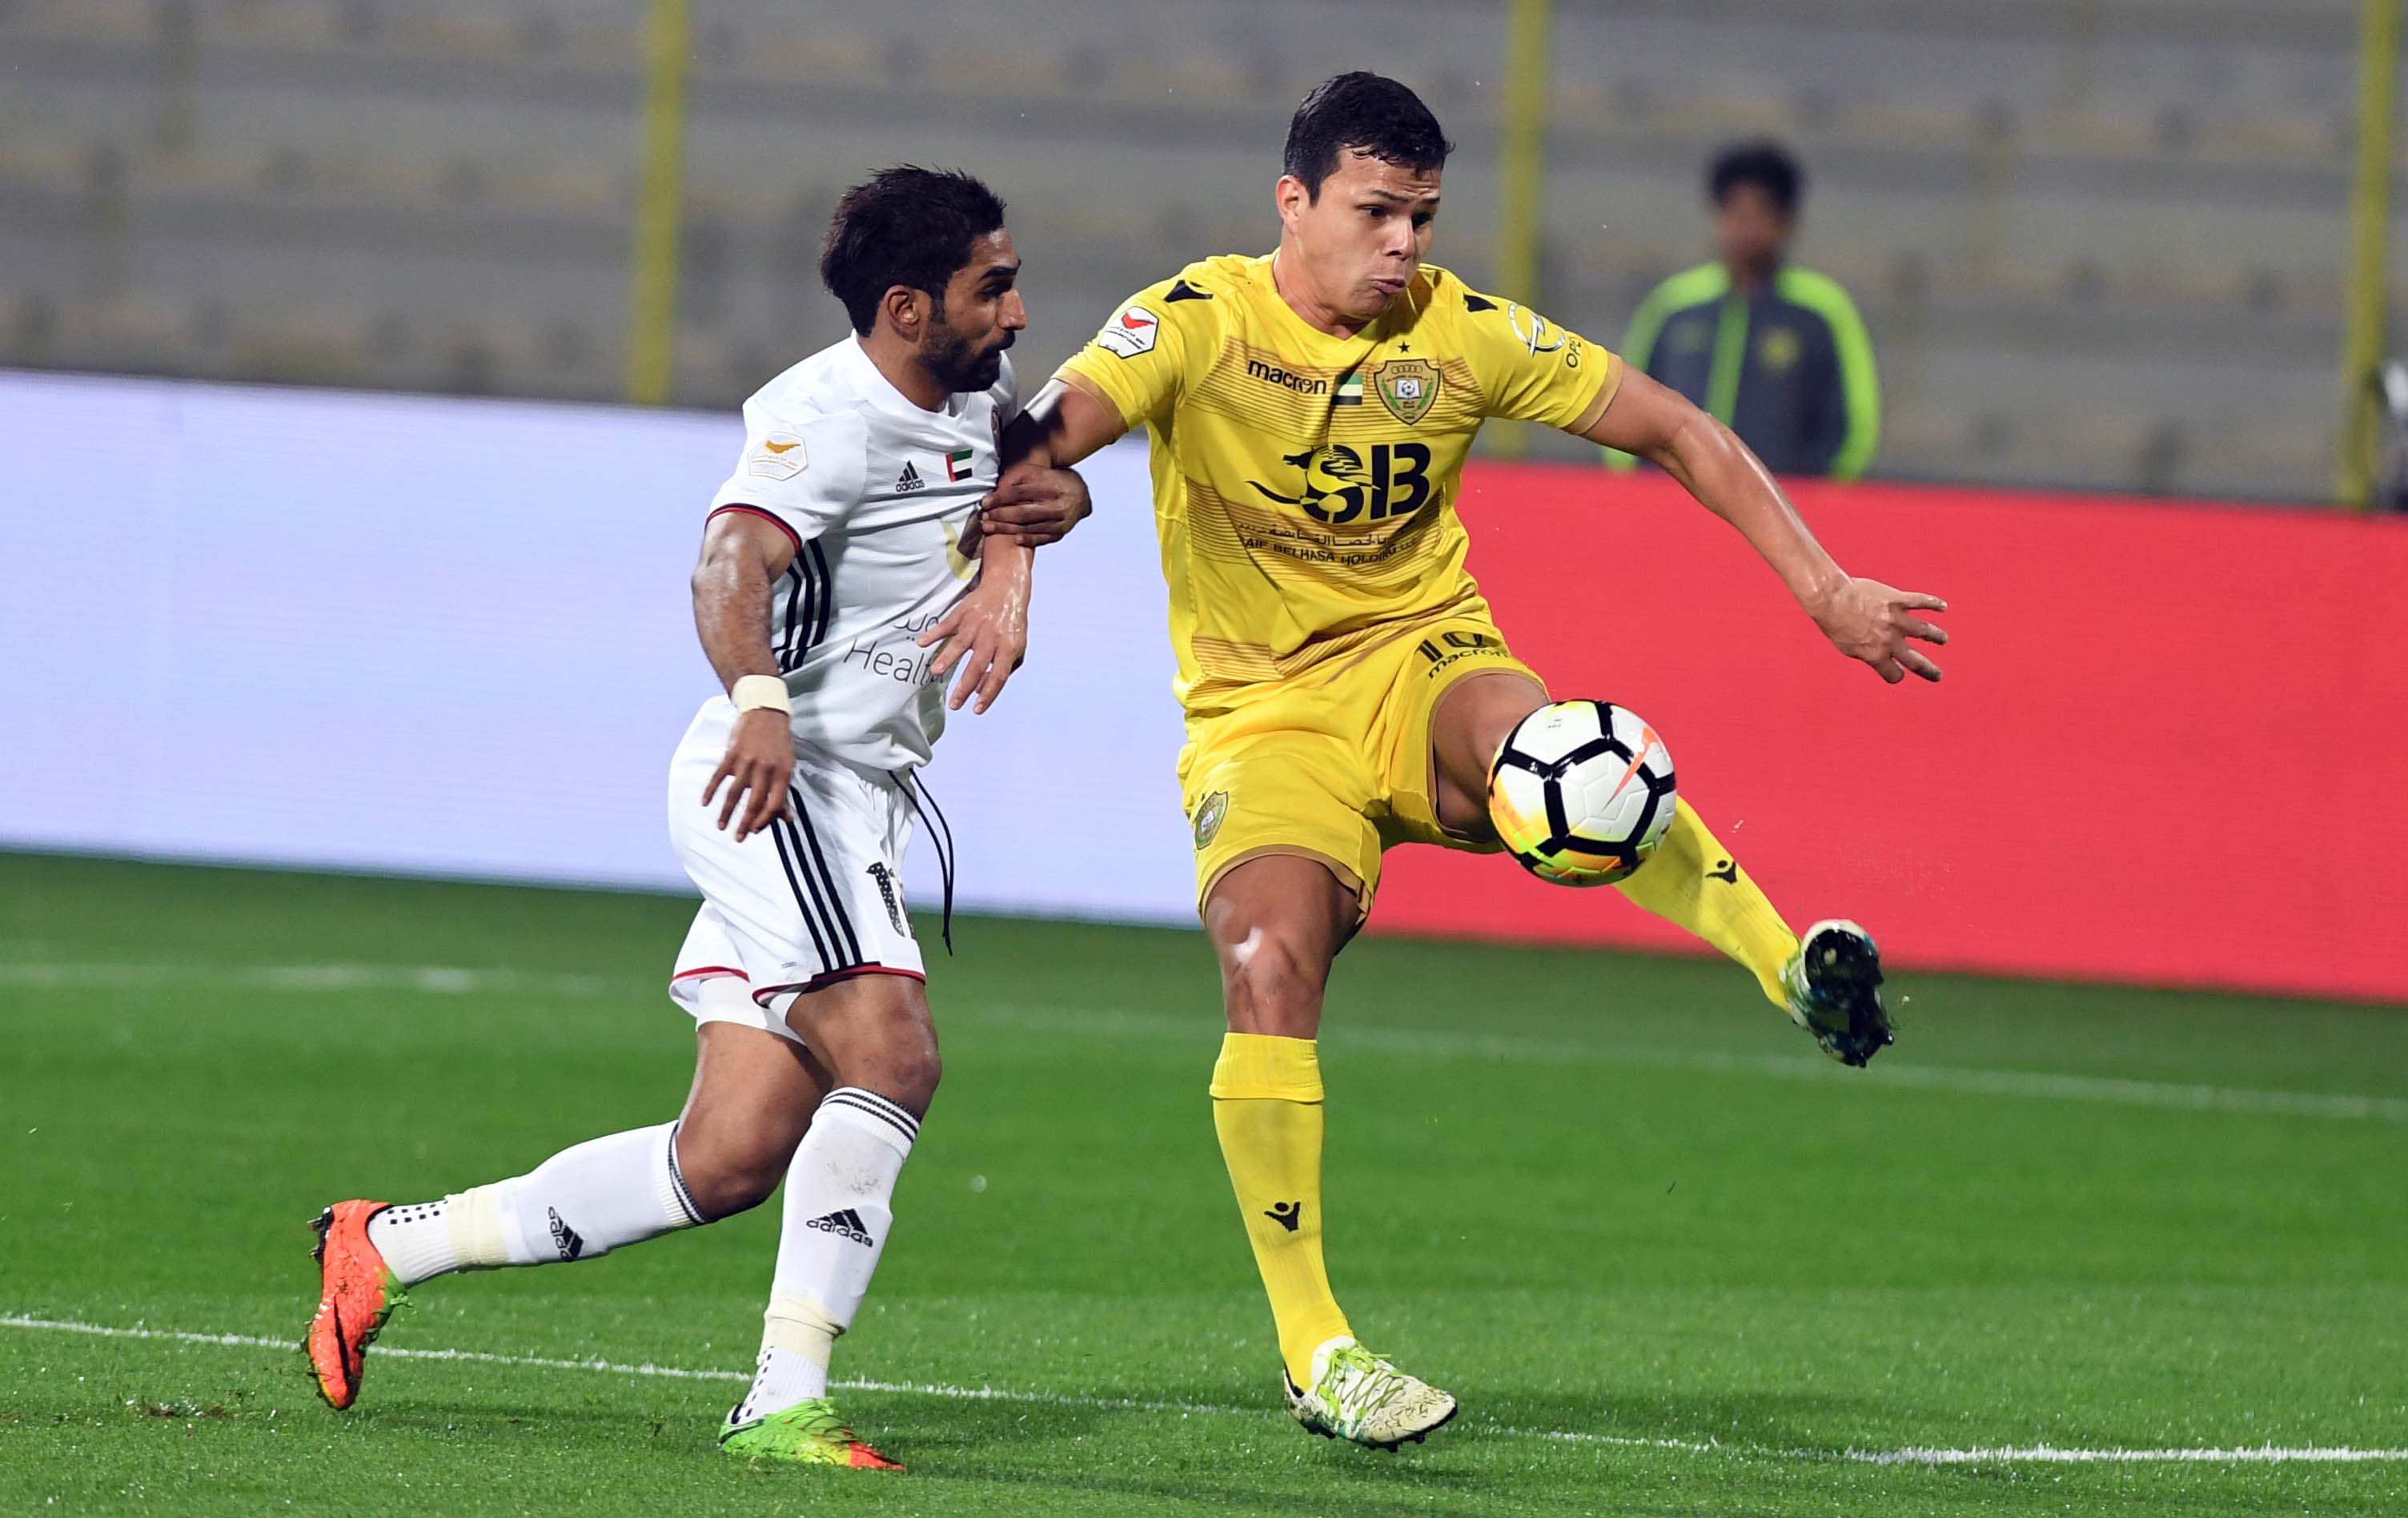 Fabio De Lima (r) did not have his usual influence for Al Wasl.